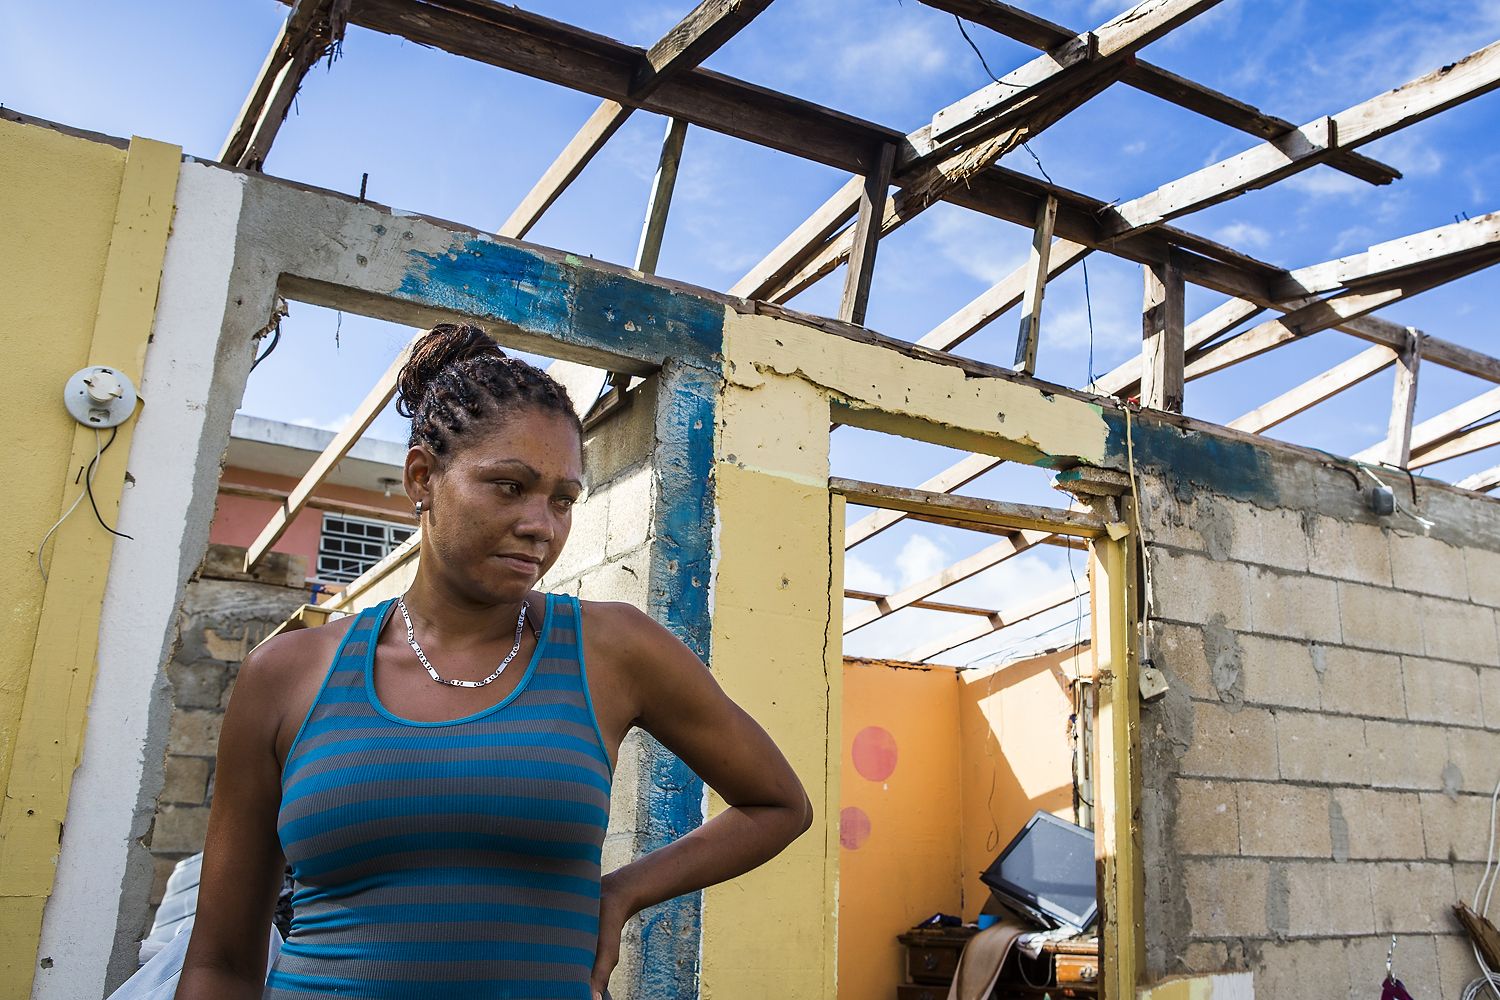 Rosalda Olma, a wife and mother to three kids, sorts through what remains of her home in Loiza. The entire home and contents were destroyed by the hurricane, and the family is living in a nearby school for the time being. “It’s hard getting used to these living conditions,” she said. “All five of us are trying to fit inside a single room.” Image by Ryan Michalesko. Puerto Rico, 2017.